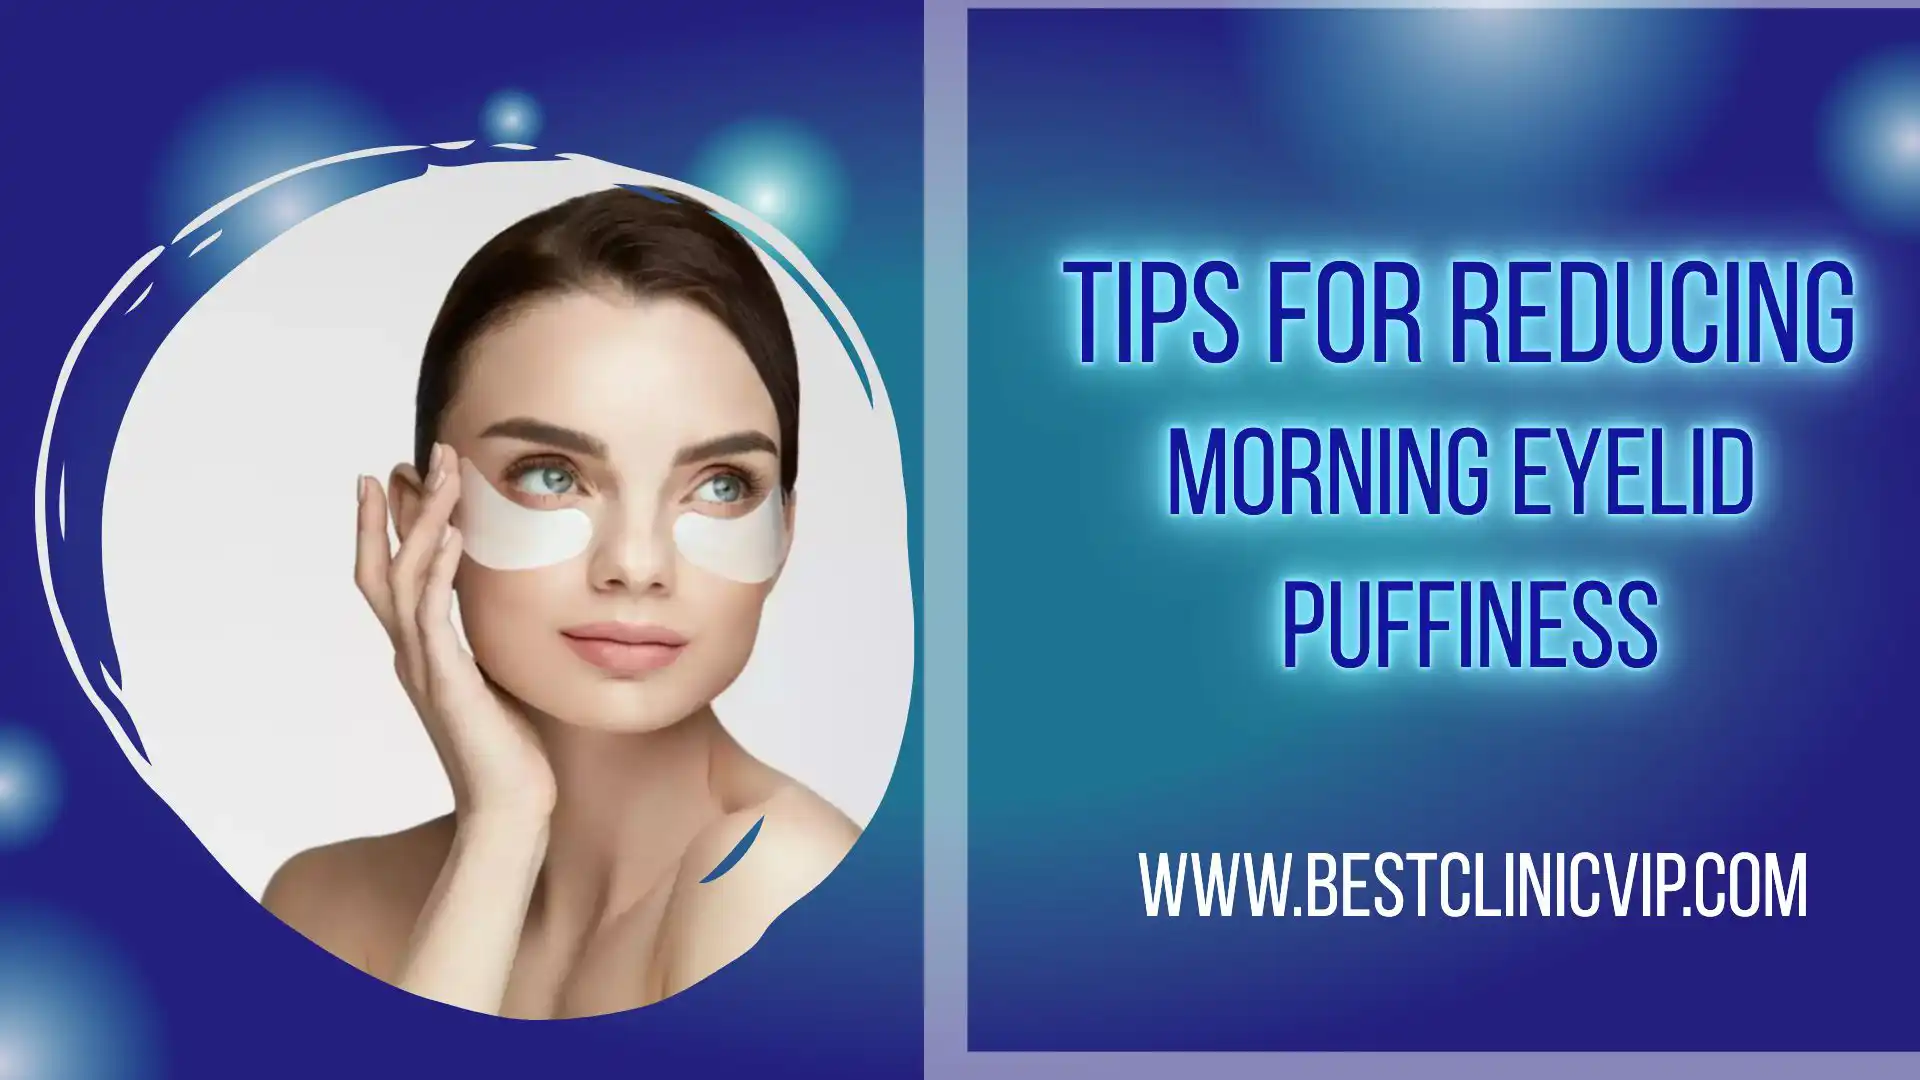 Tips for Reducing Morning Eyelid Puffiness